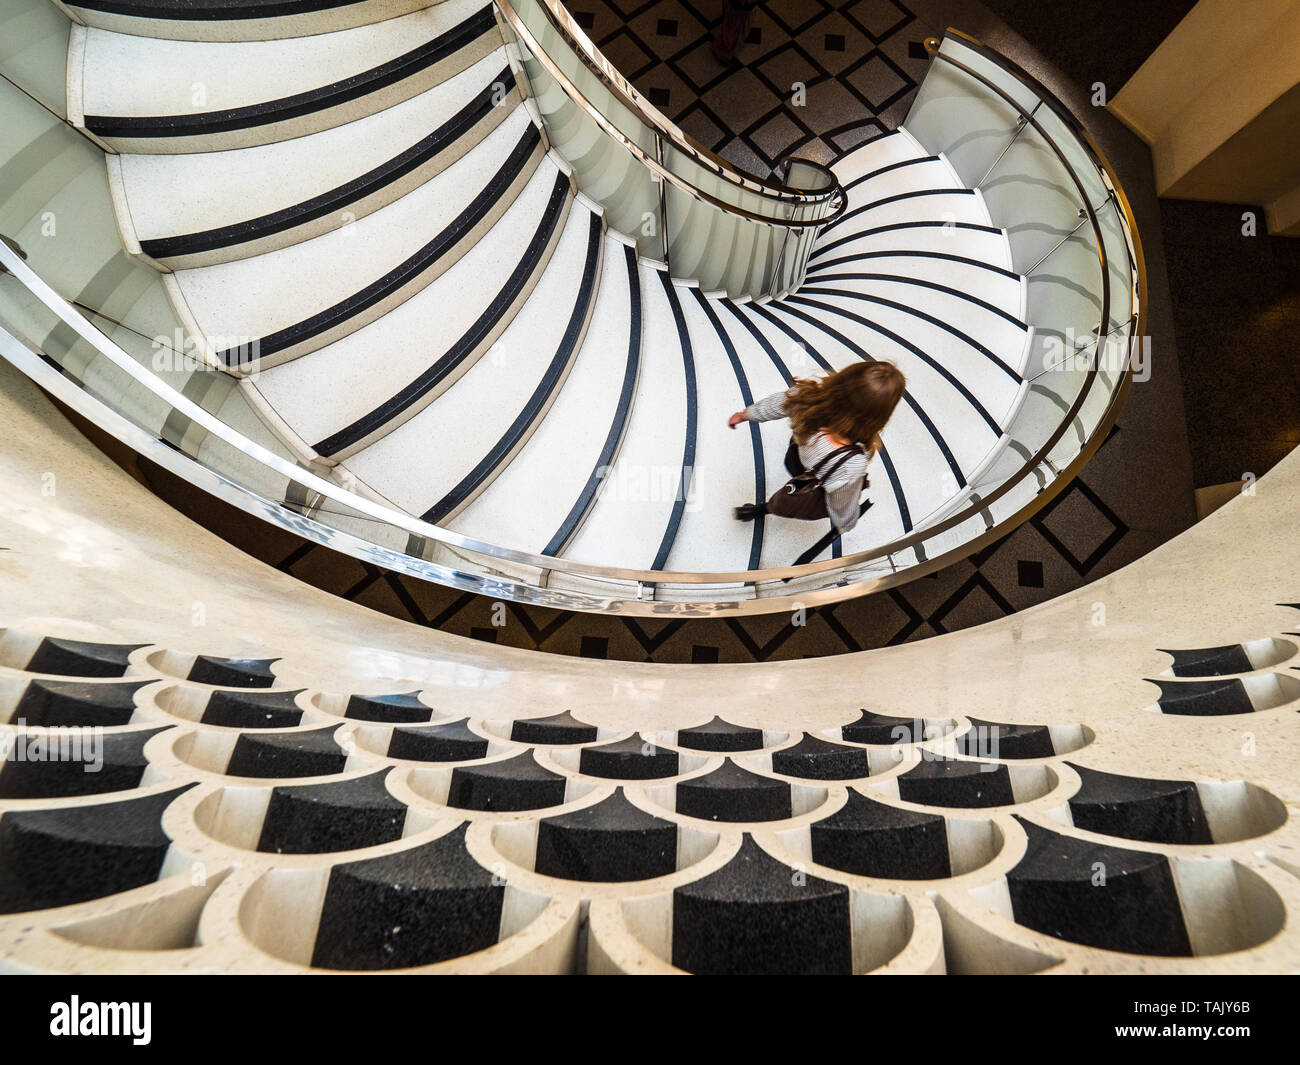 Tate Britain Spiral Staircase - the elegant spiral staircase at the Tate Britain Art Gallery - Architects Caruso St John completed 2013 Stock Photo